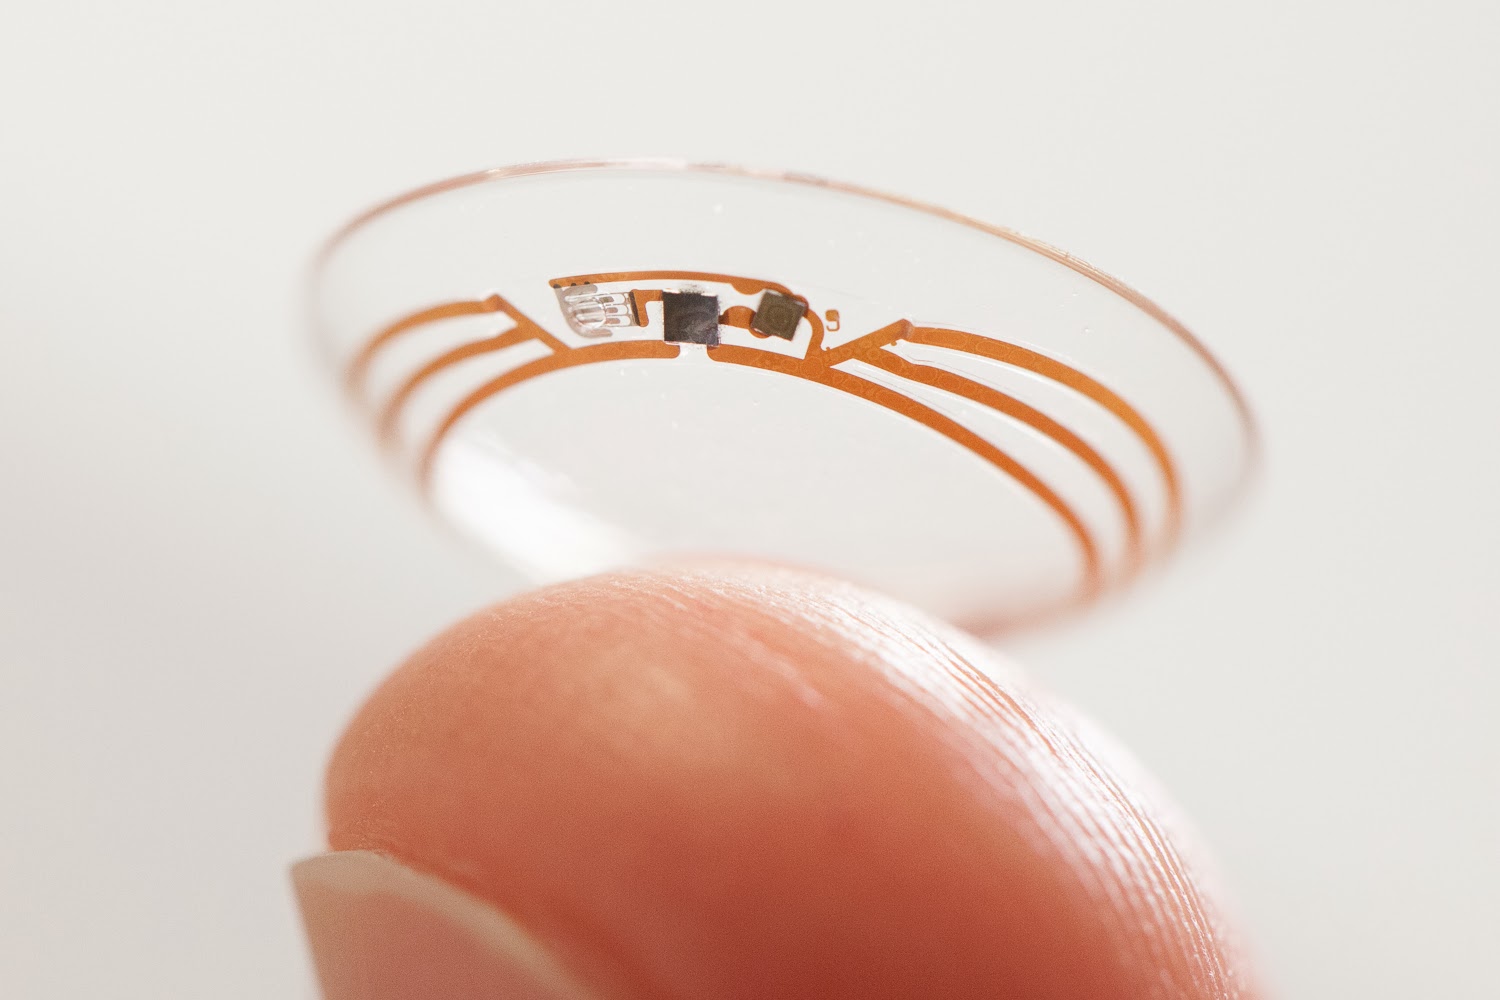 Closeup of a Google smart lens with glucose monitor